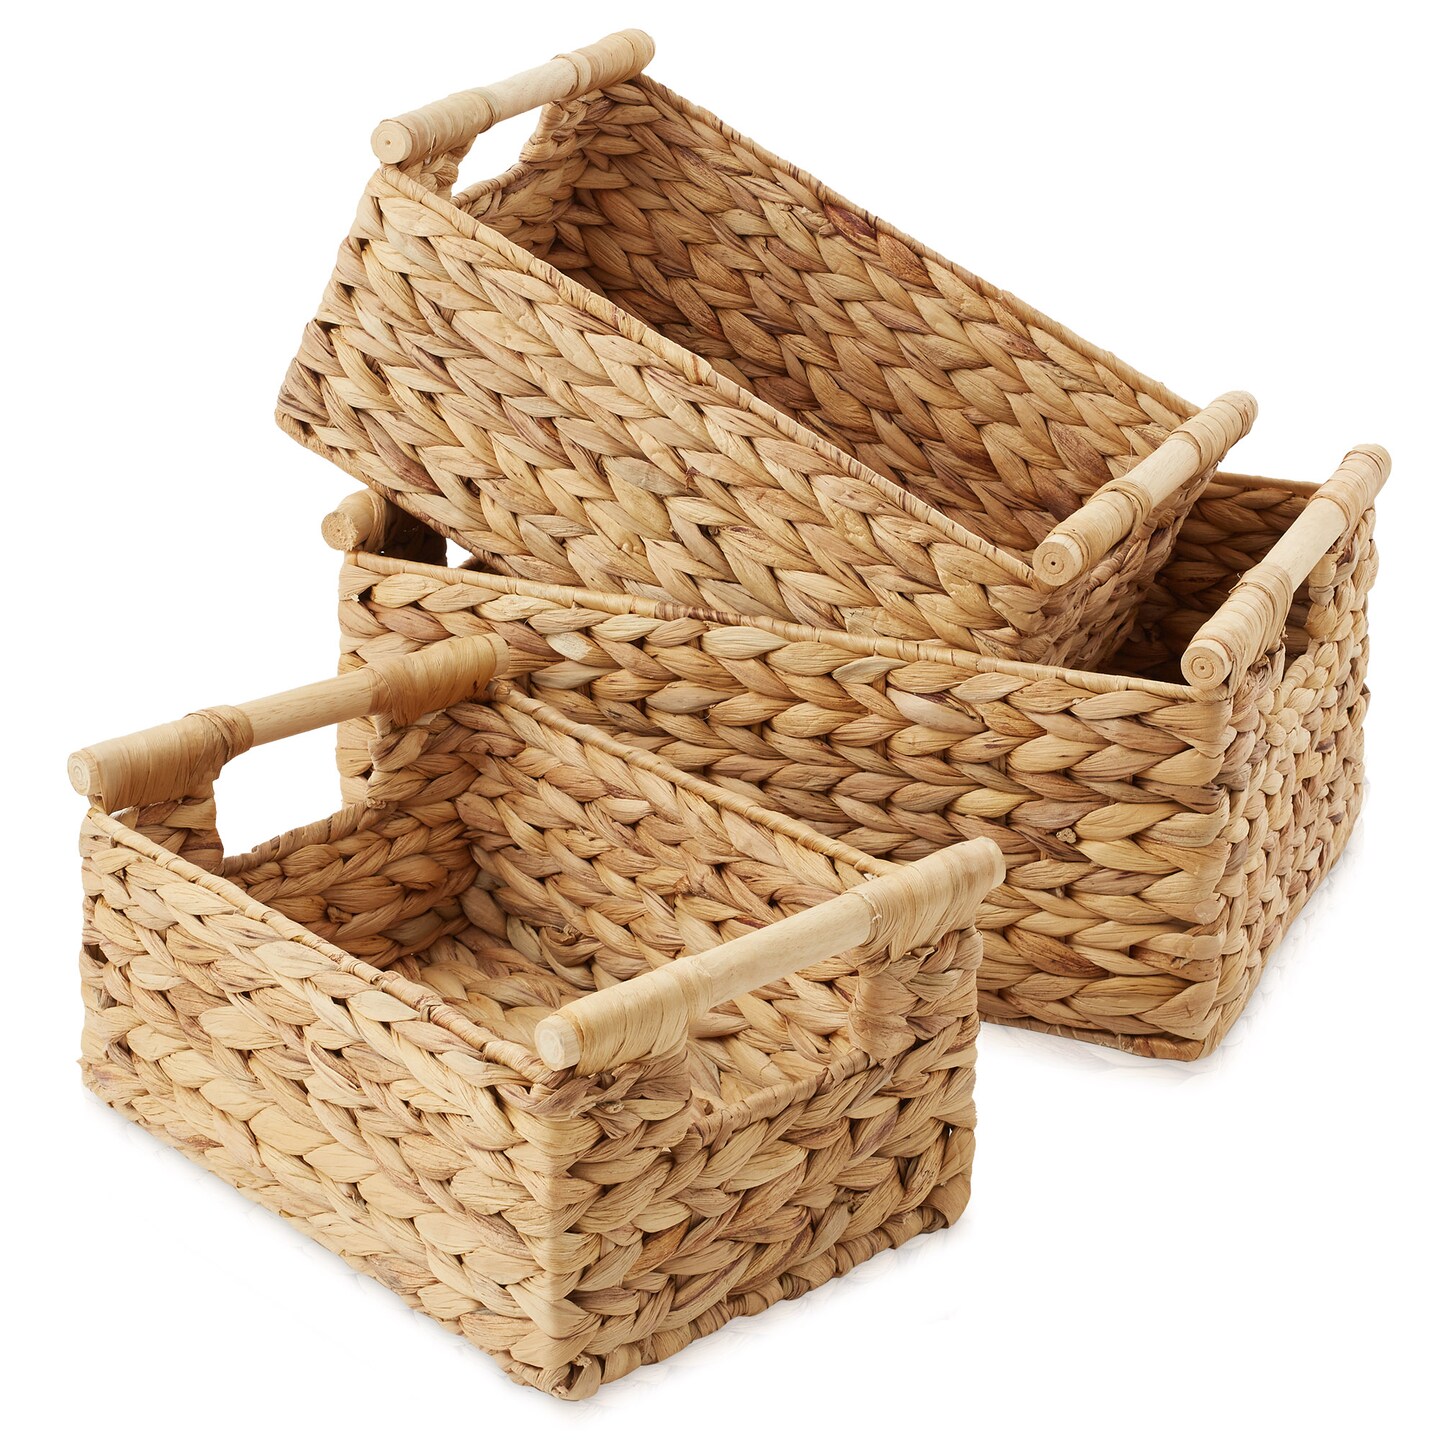 Casafield (Set of 3) Water Hyacinth Rectangular Storage Baskets with Wooden Handles - Small, Medium, Large Woven Nesting Baskets for Organizing